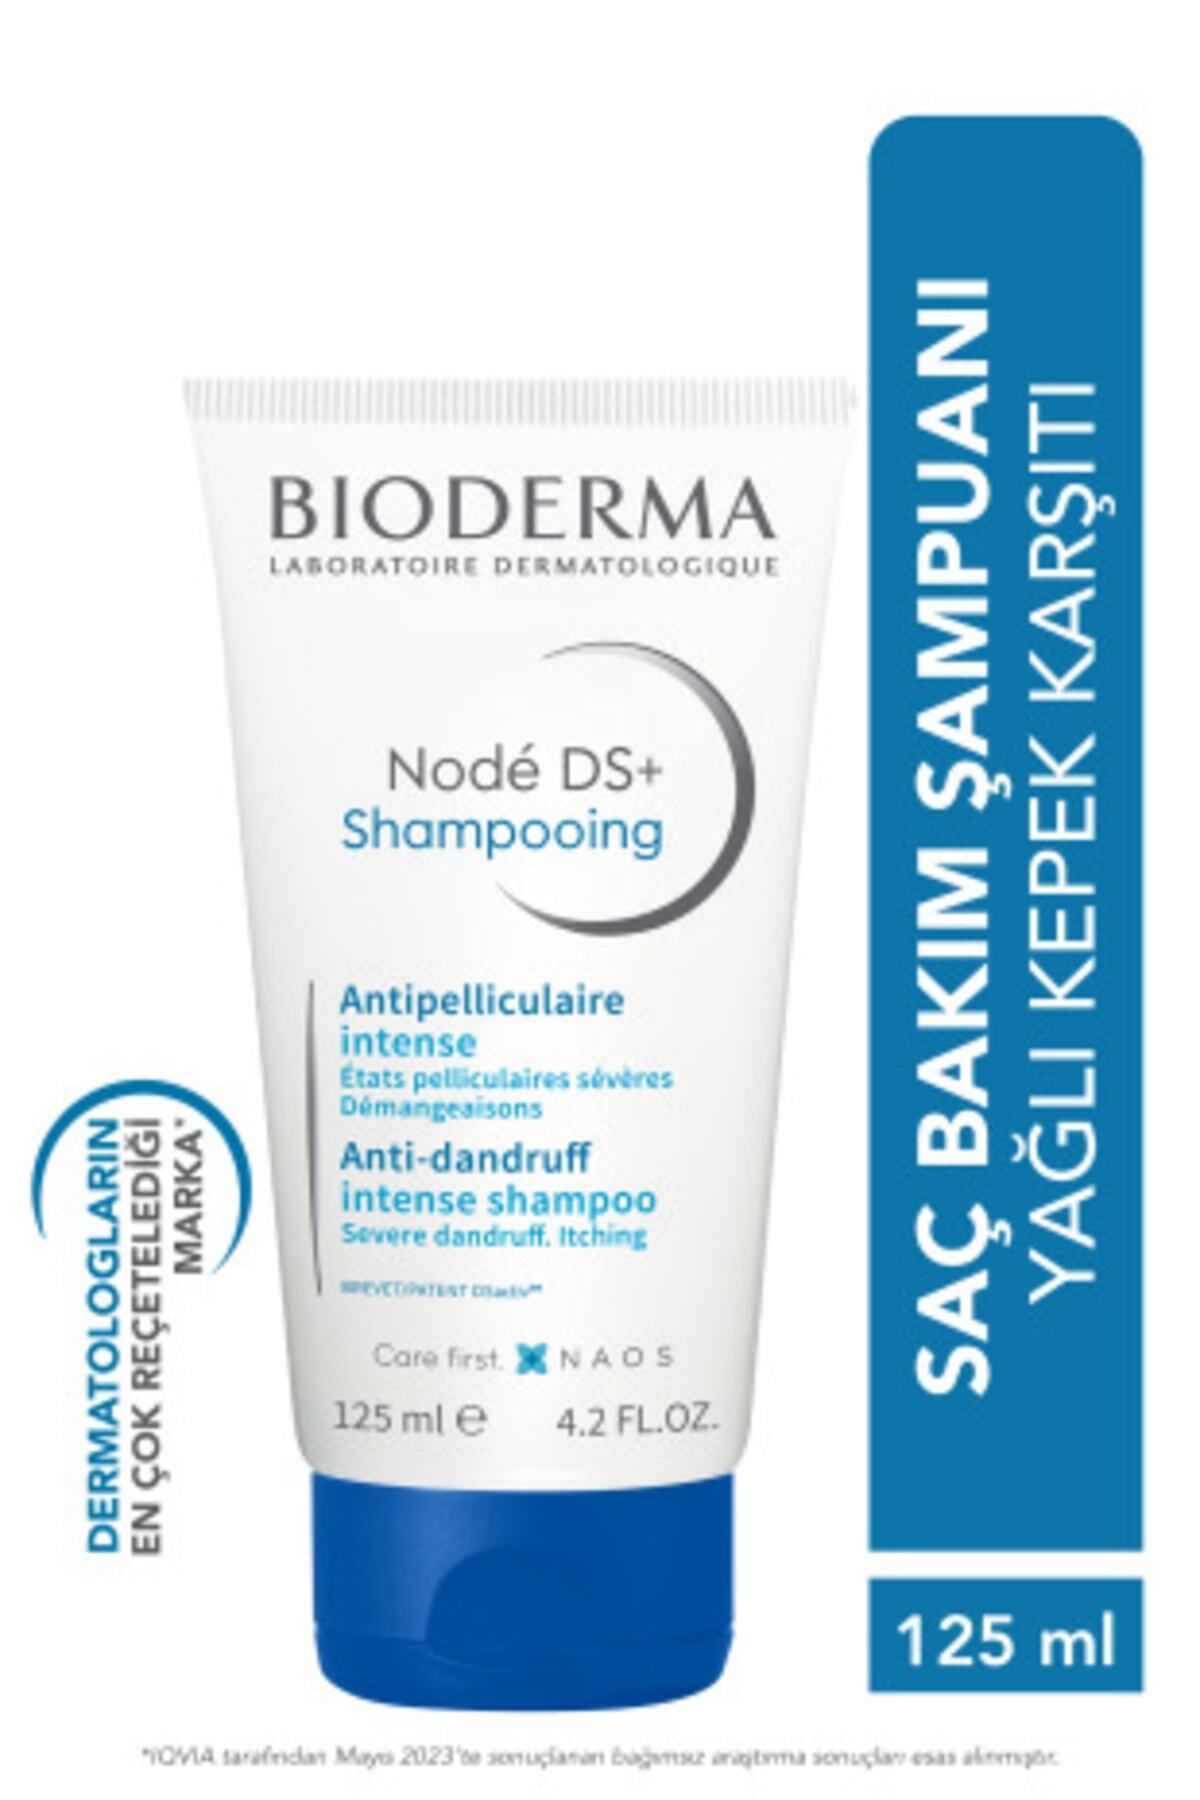 Bioderma Hair Perfecting Node Ds Against Oily Dandruff Detergent-Free Hair Care Shampoo 125 ml PSSN956